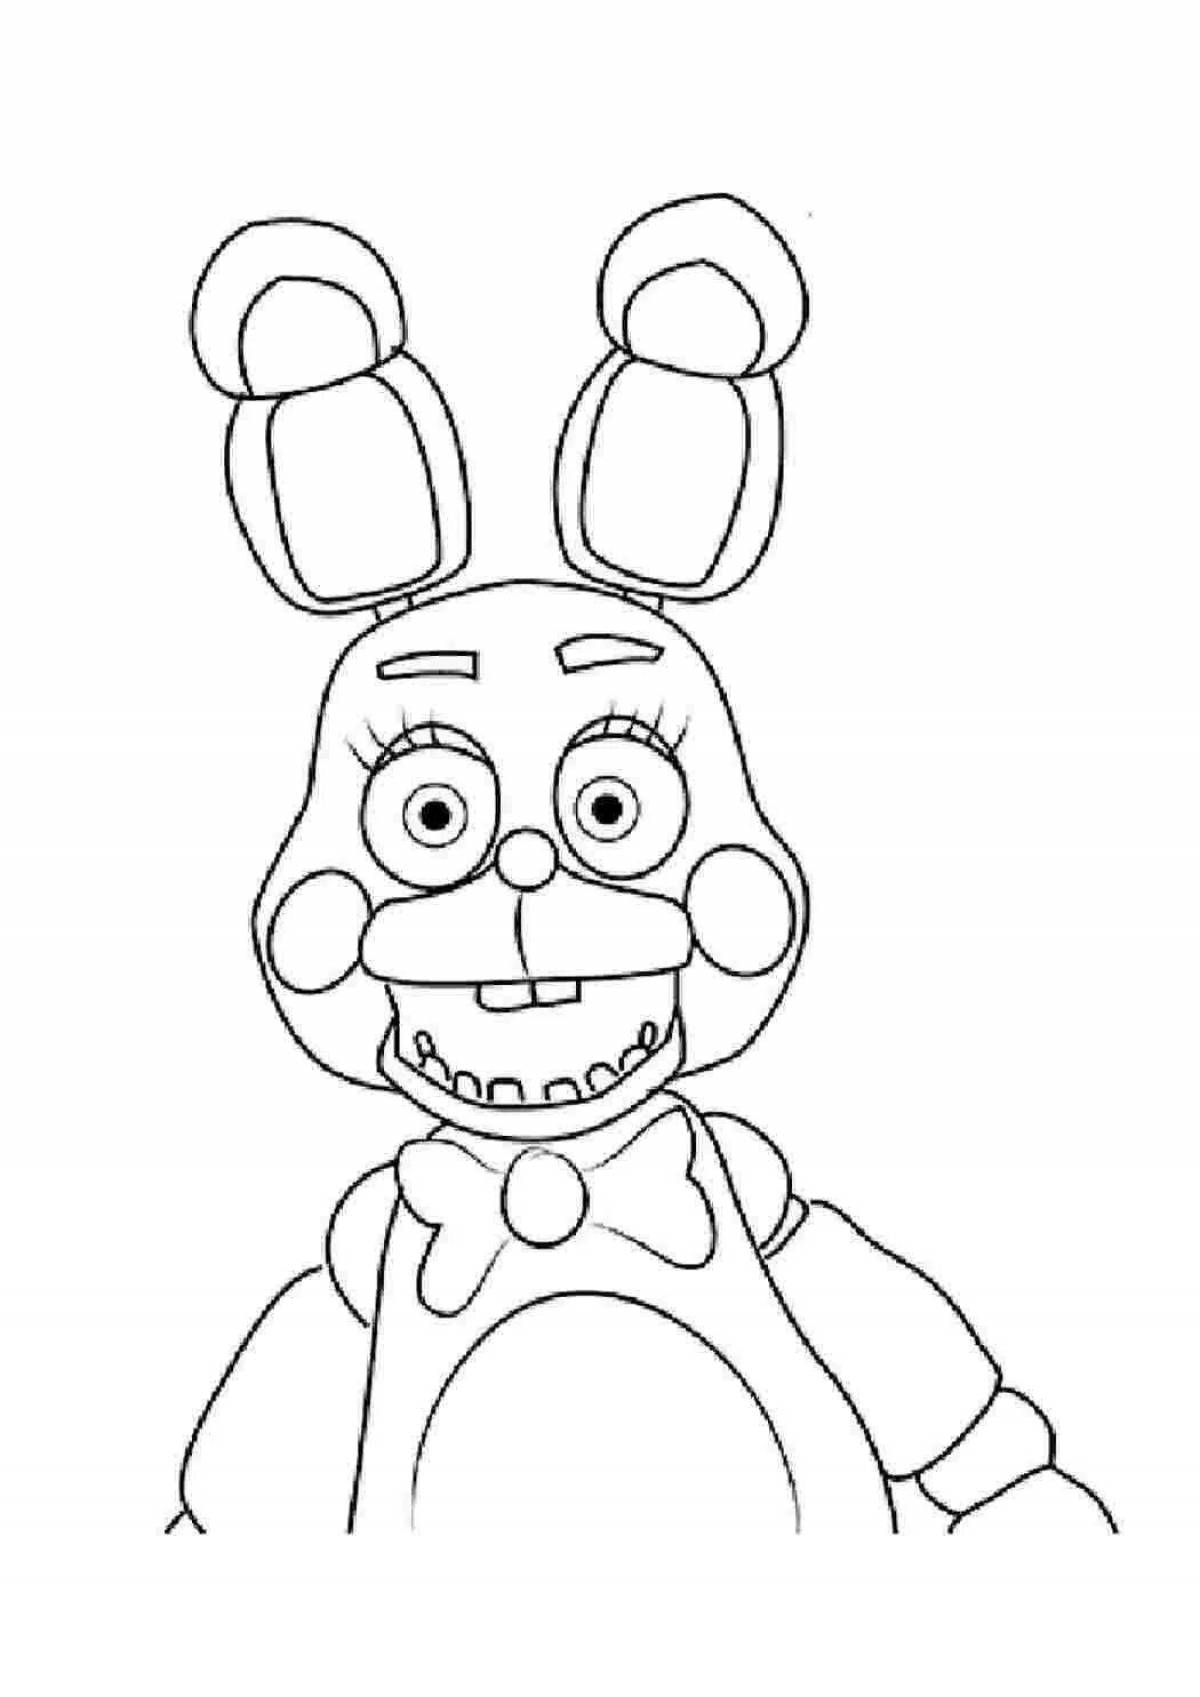 Exciting bonnie mask coloring book